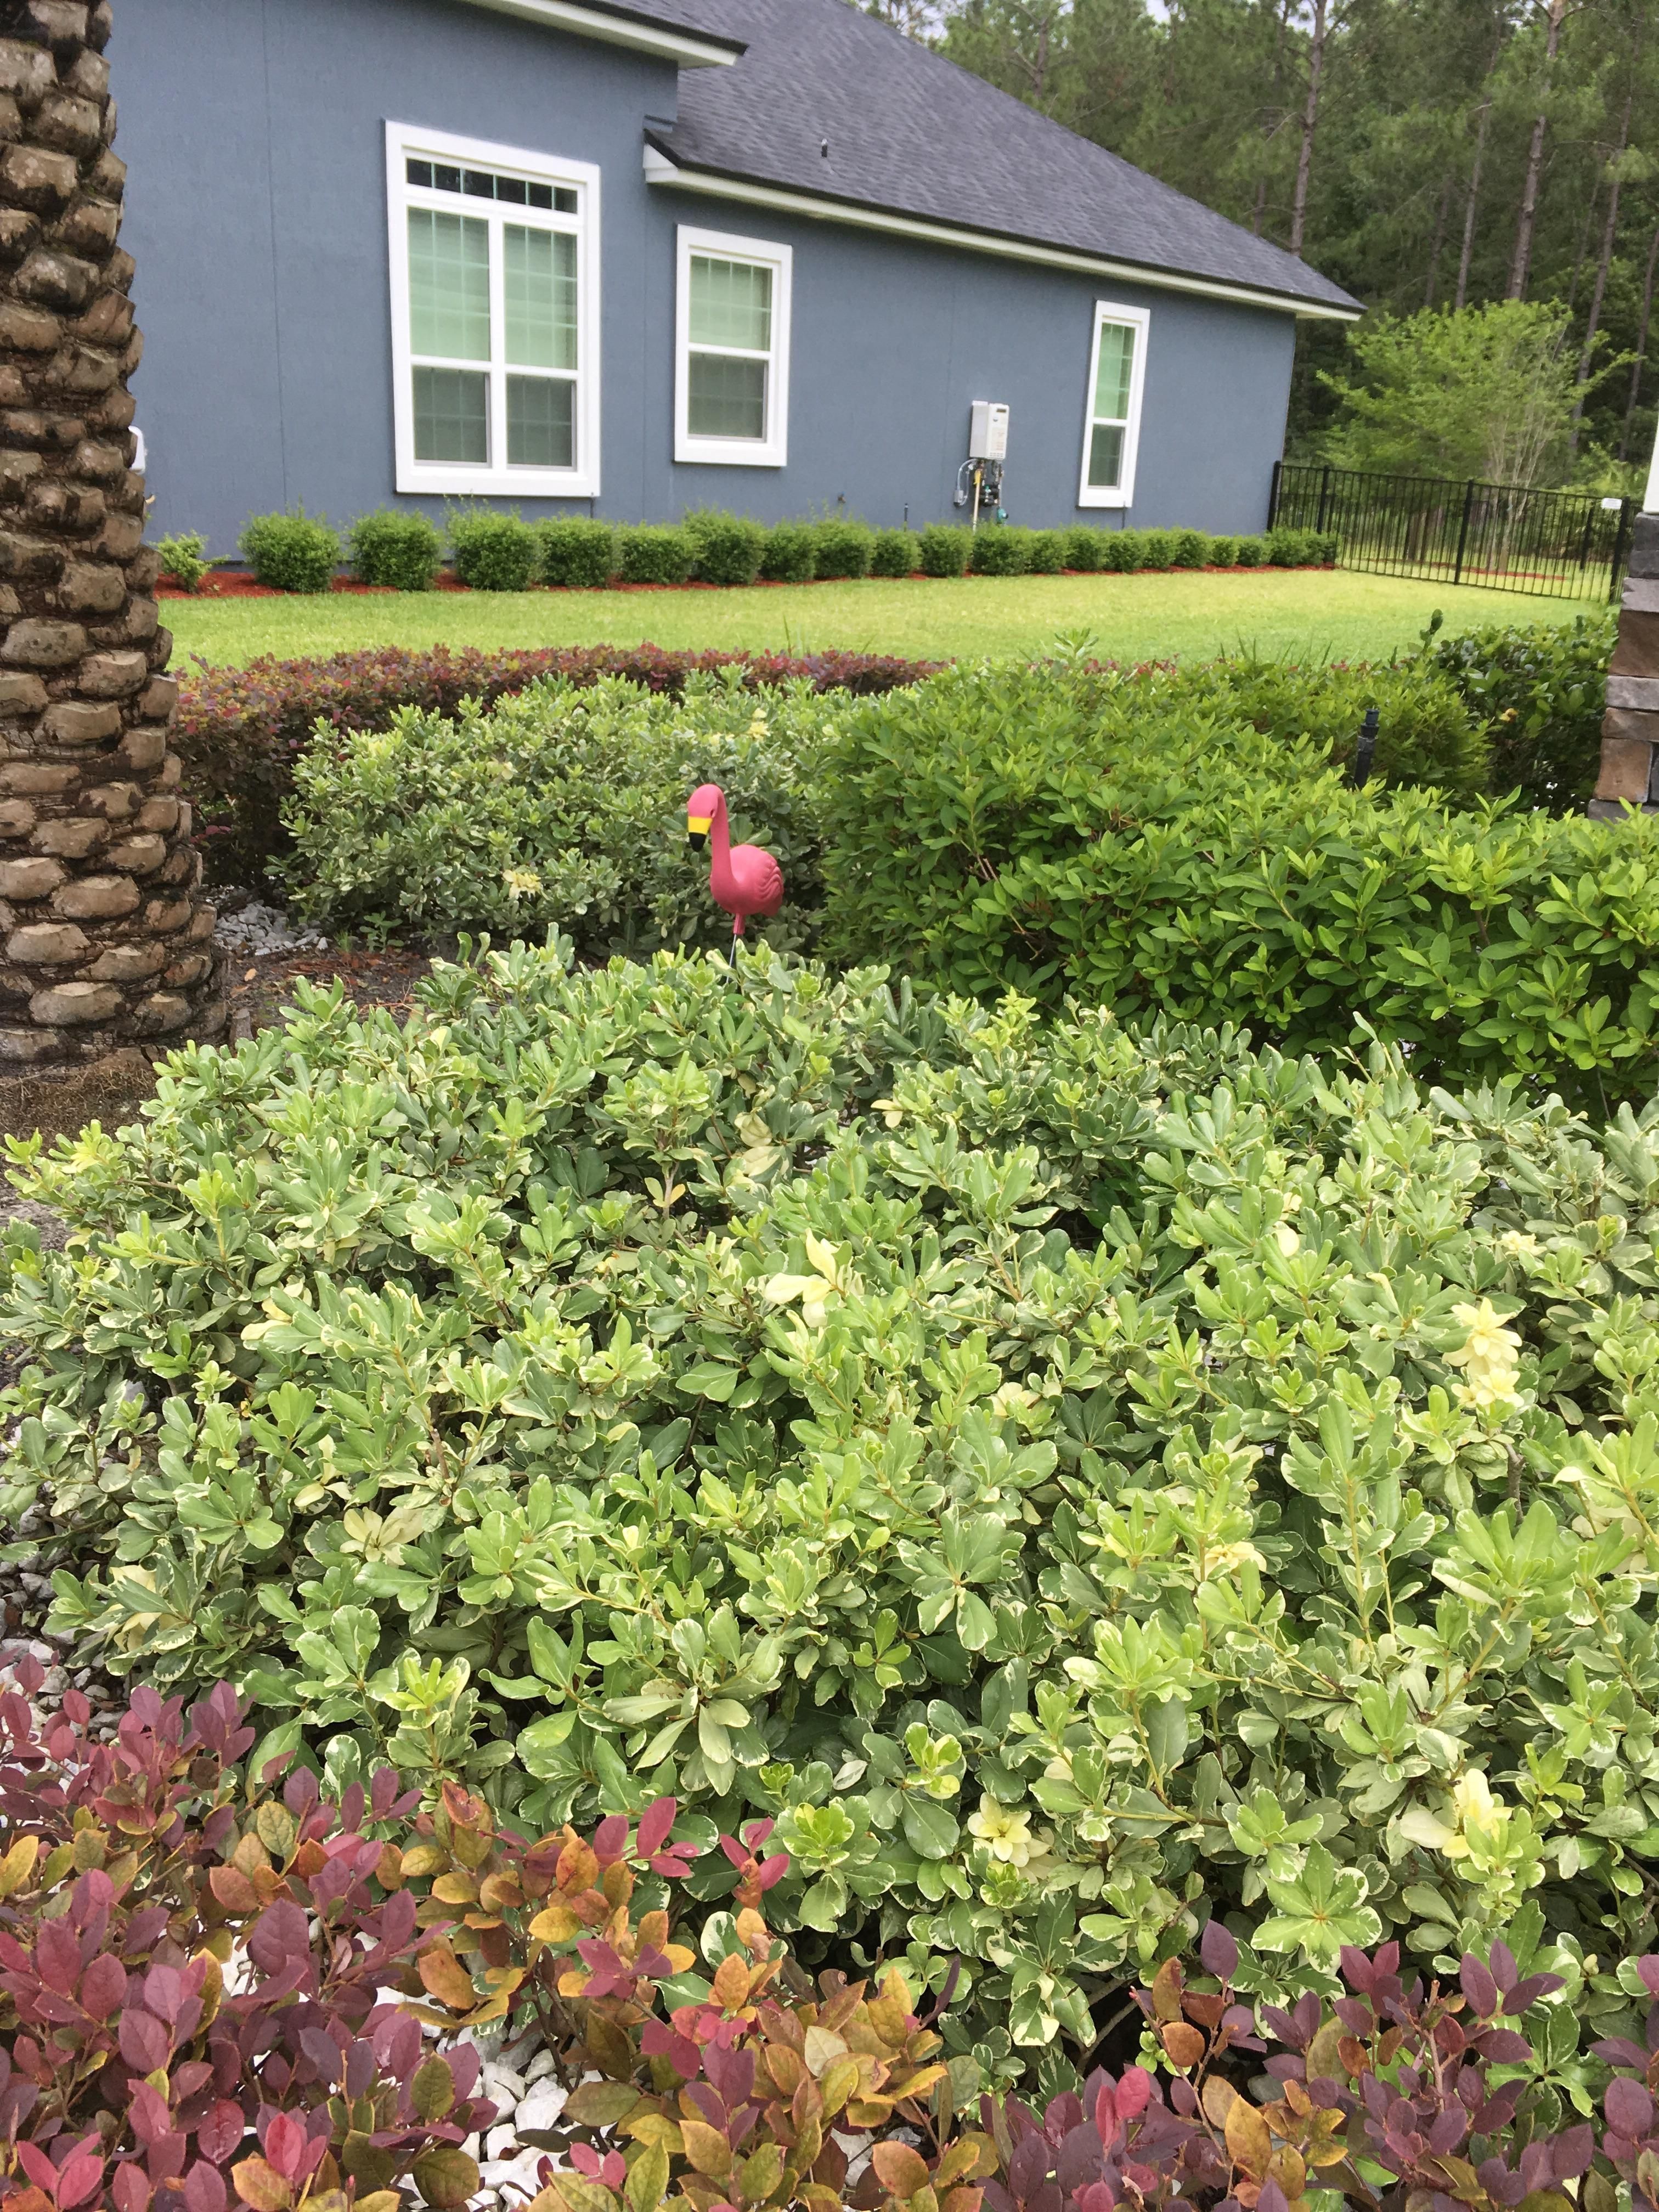 Wife said “no cheap flamingo in my yard” 1 month and counting.